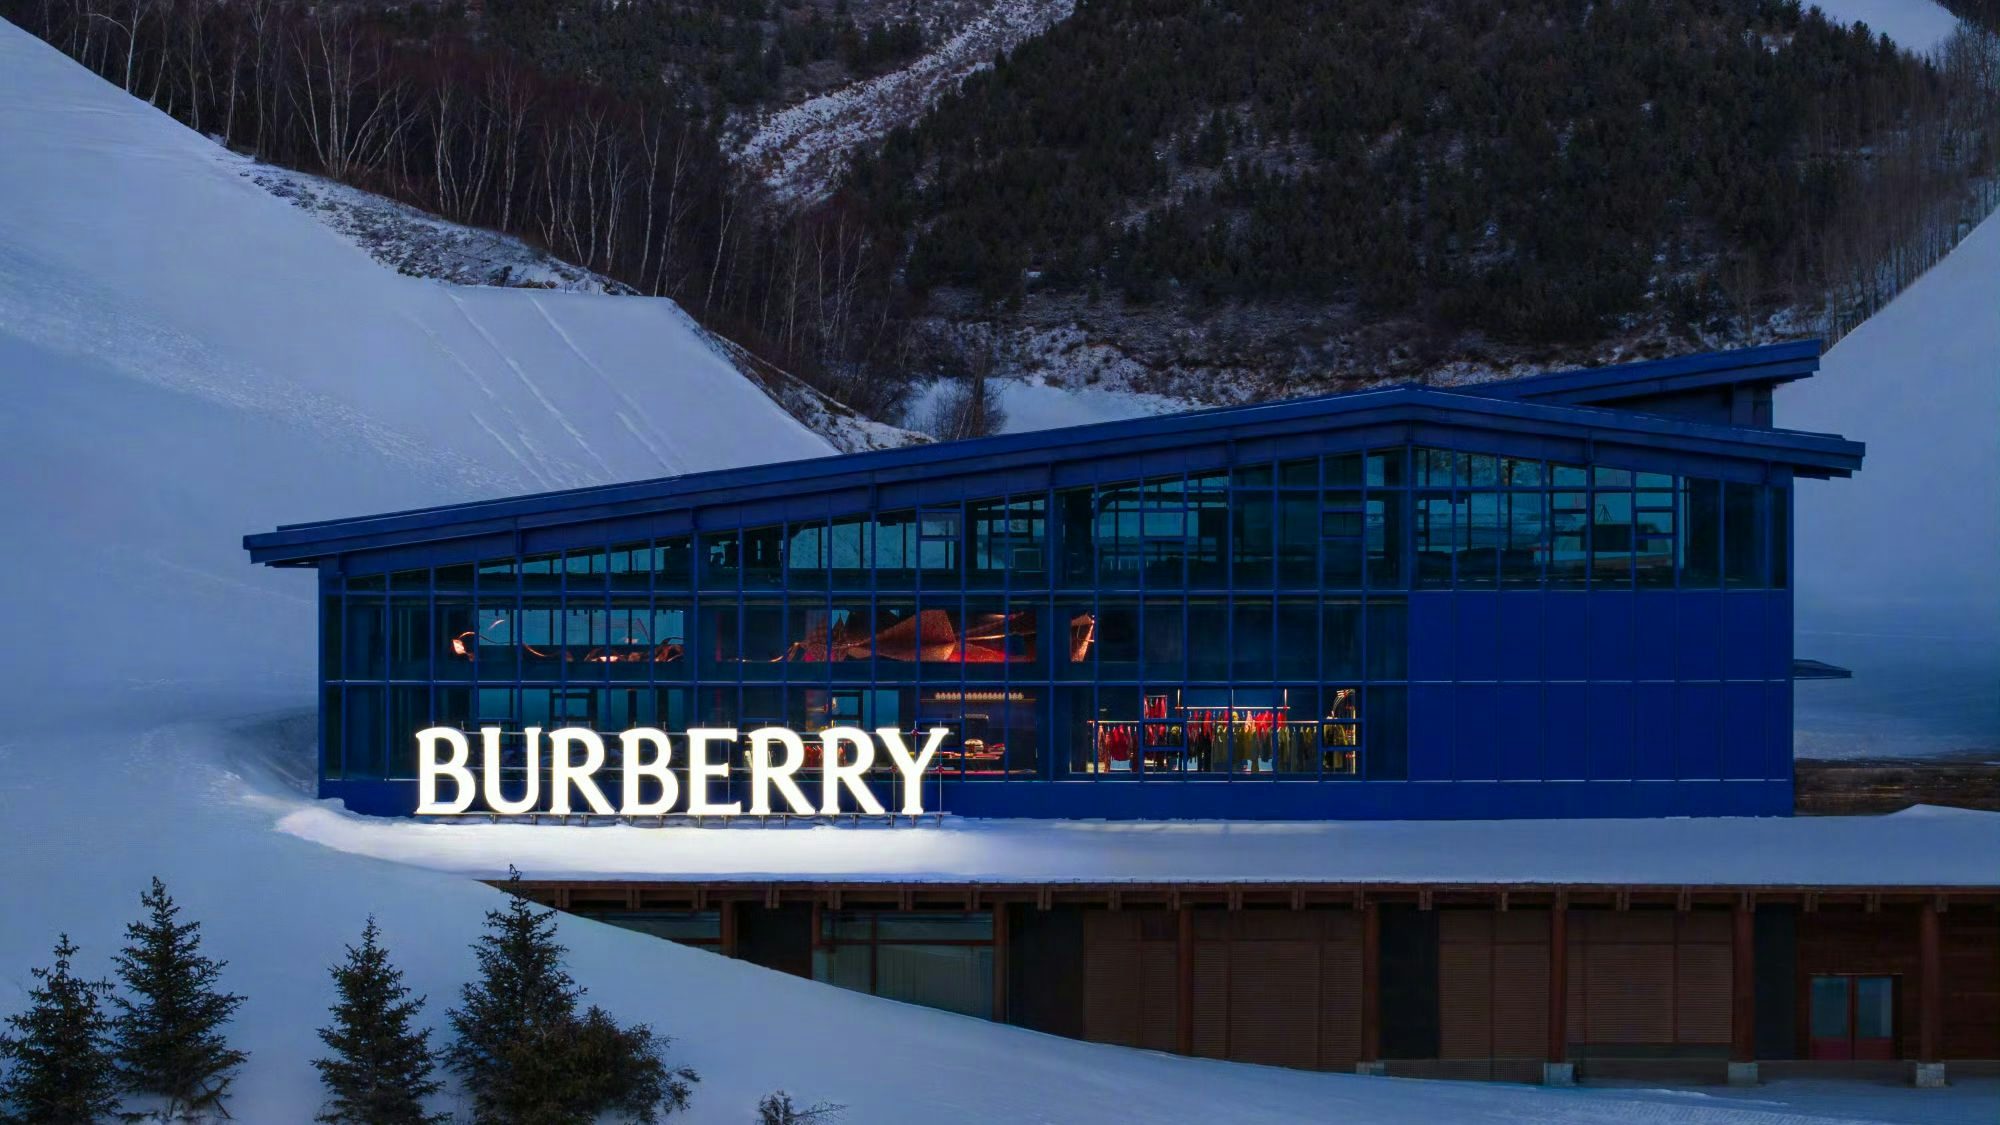 Eco-retail, alpine allure: Arc'teryx and Burberry fuel China’s love of winter sports